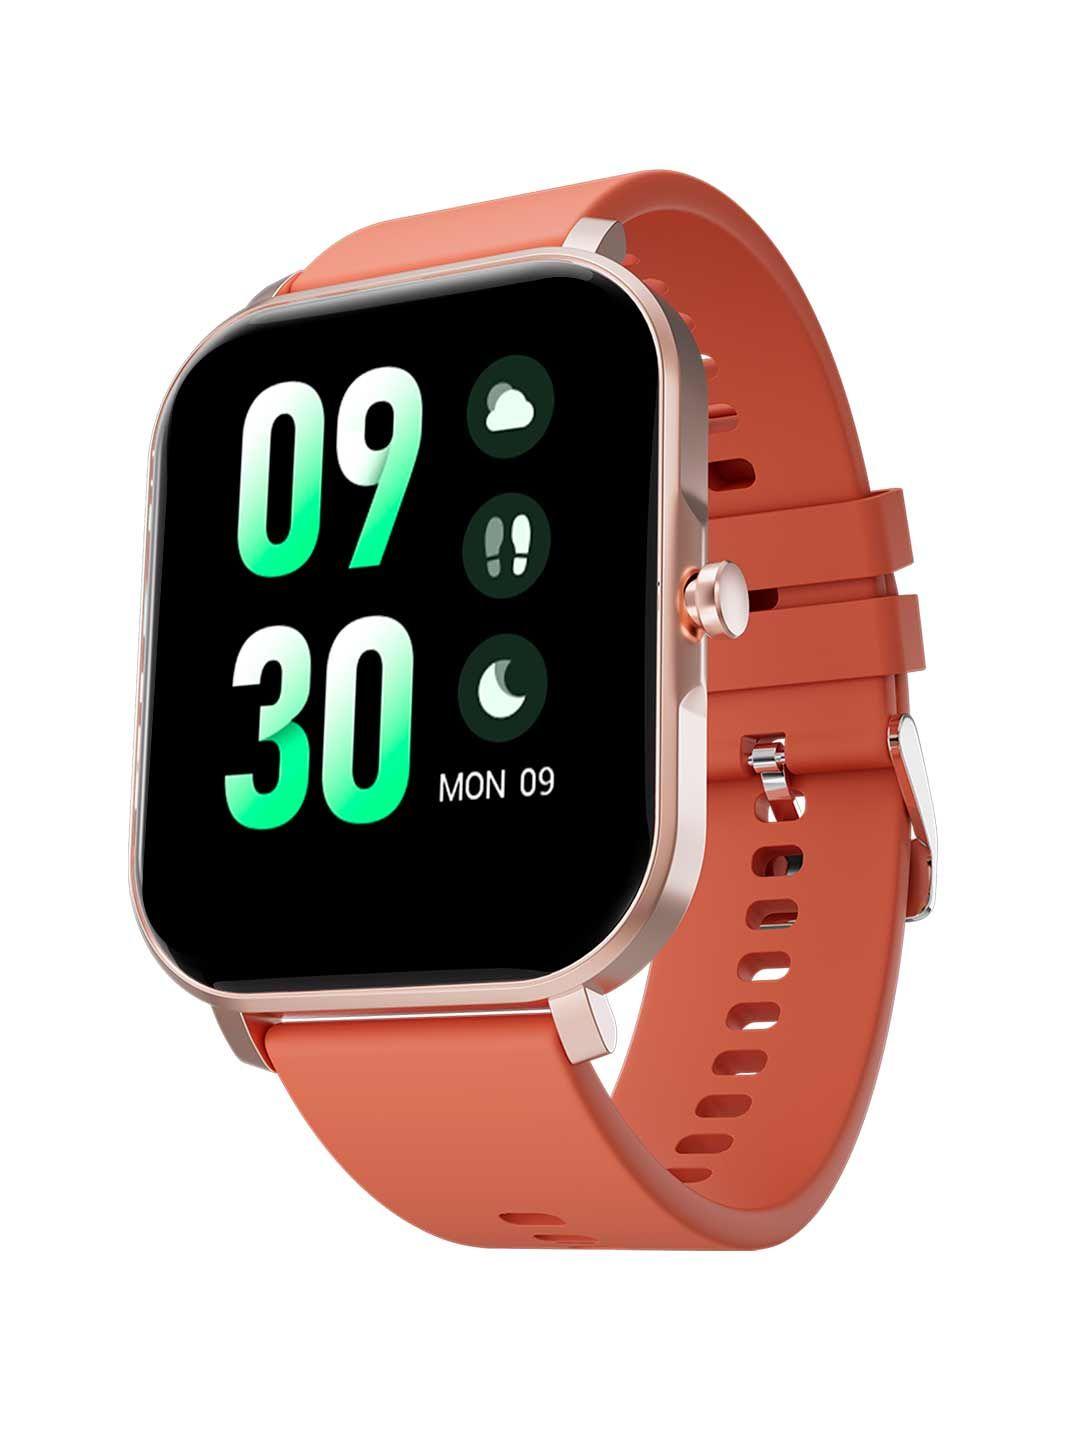 fire-boltt epic plus with spo2 & heart rate tracking & touchscreen smartwatch 45bswaay17